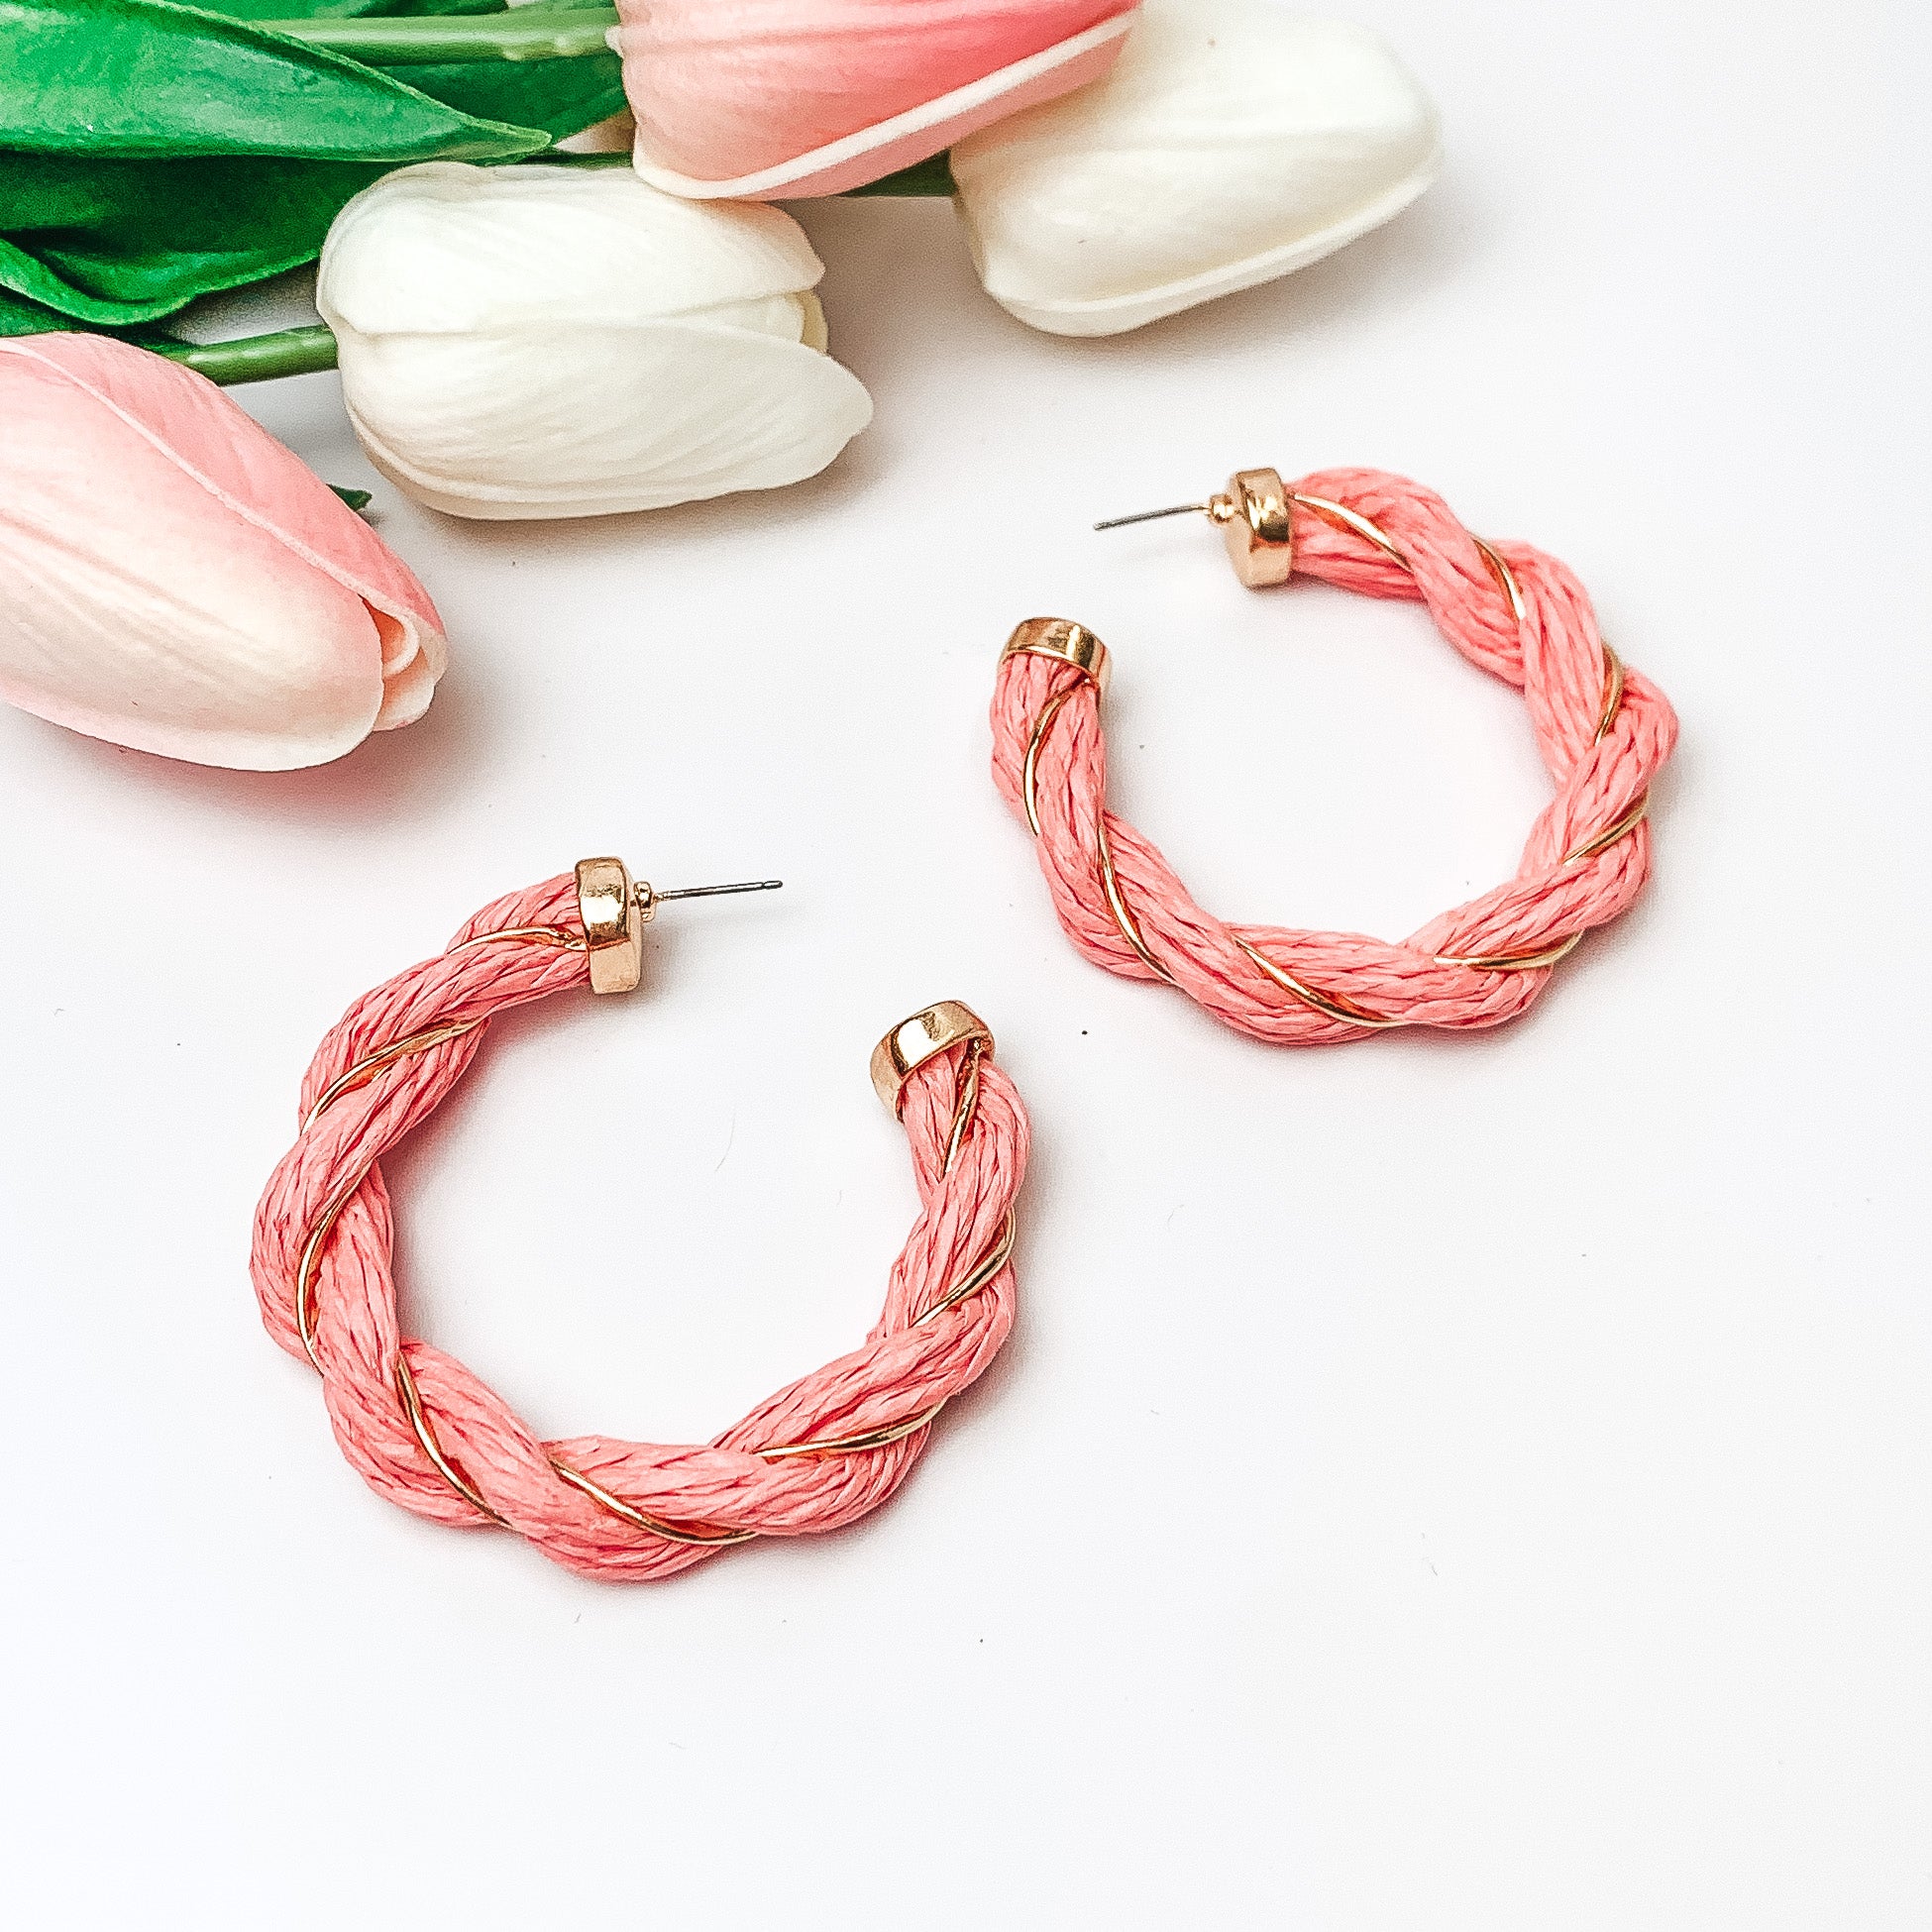 Pictured are pink raffia twisted hoop earrings with gold detailing.  They are pictured with pink and white tulips on a white background.